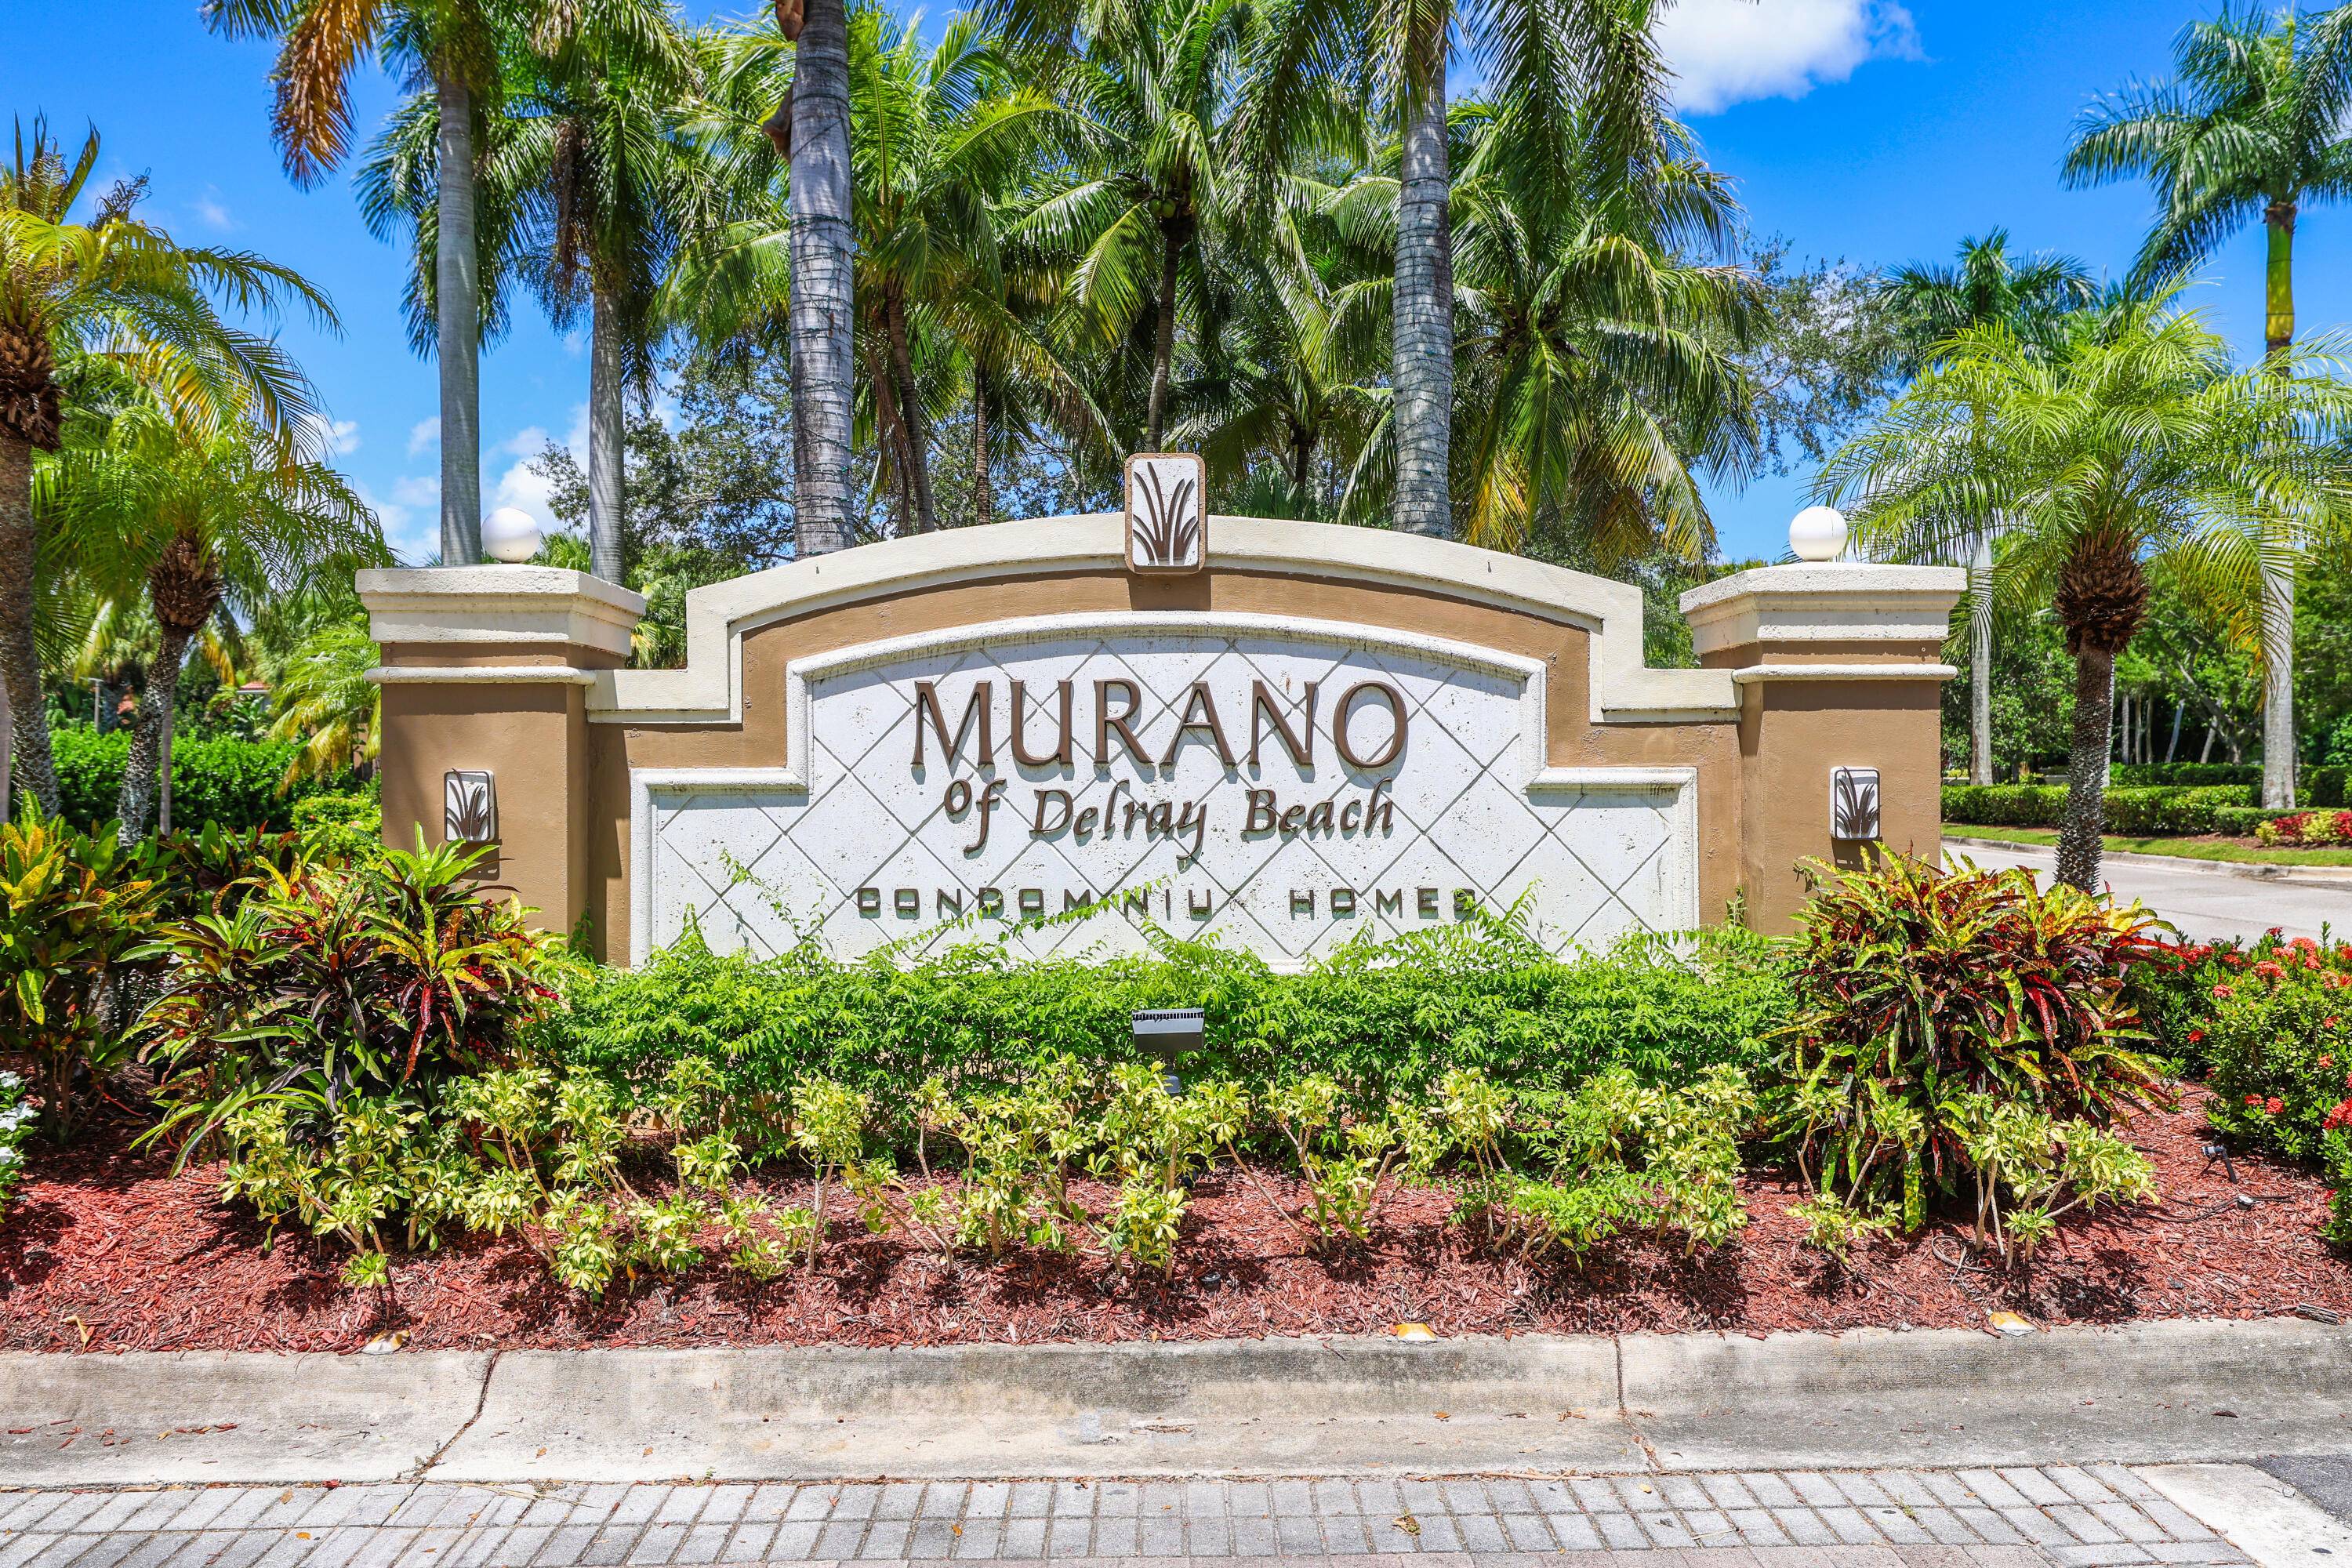 This beautiful 1 bedroom, 1 bathroom condo offers an open floorplan and spacious living area.